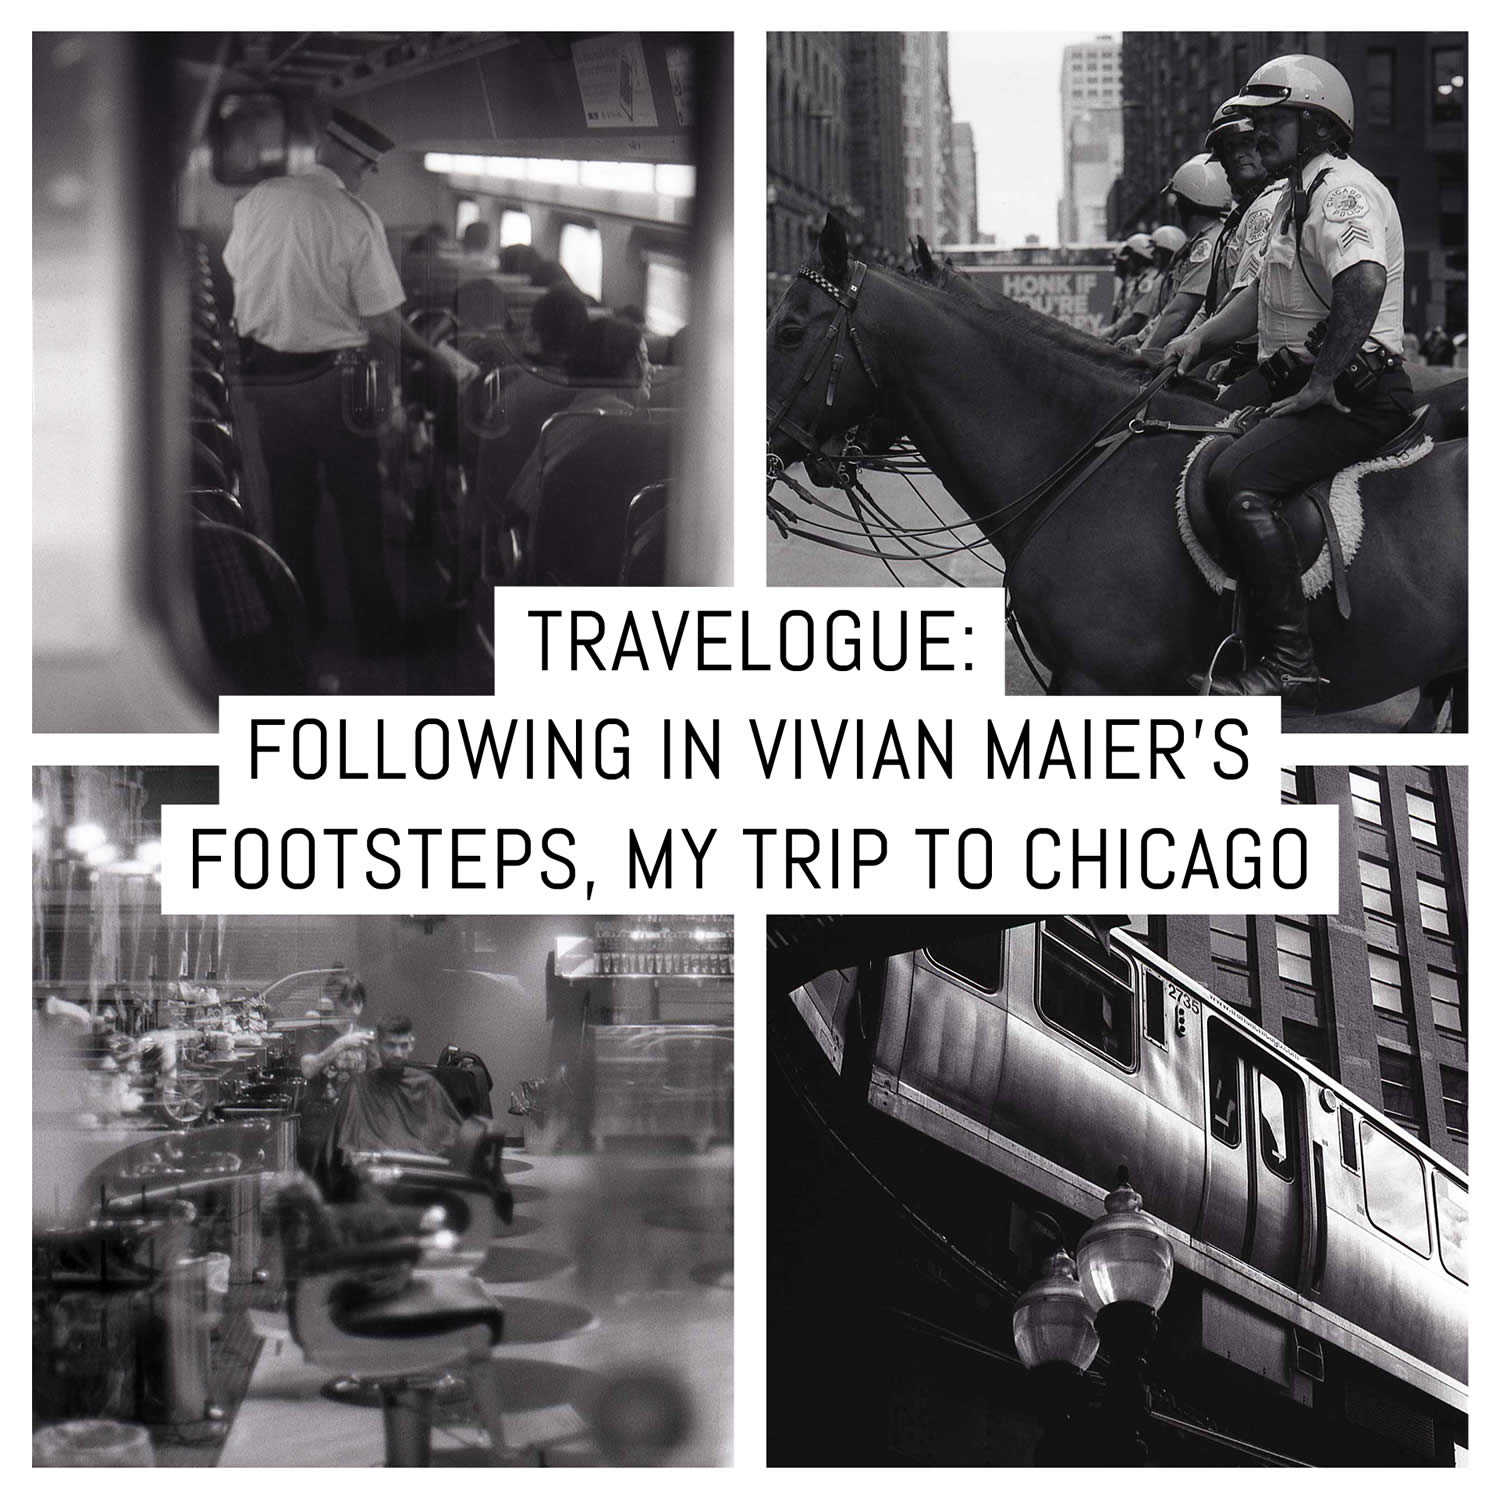 Travelogue: Following in Vivian Maier’s footsteps, my trip to Chicago